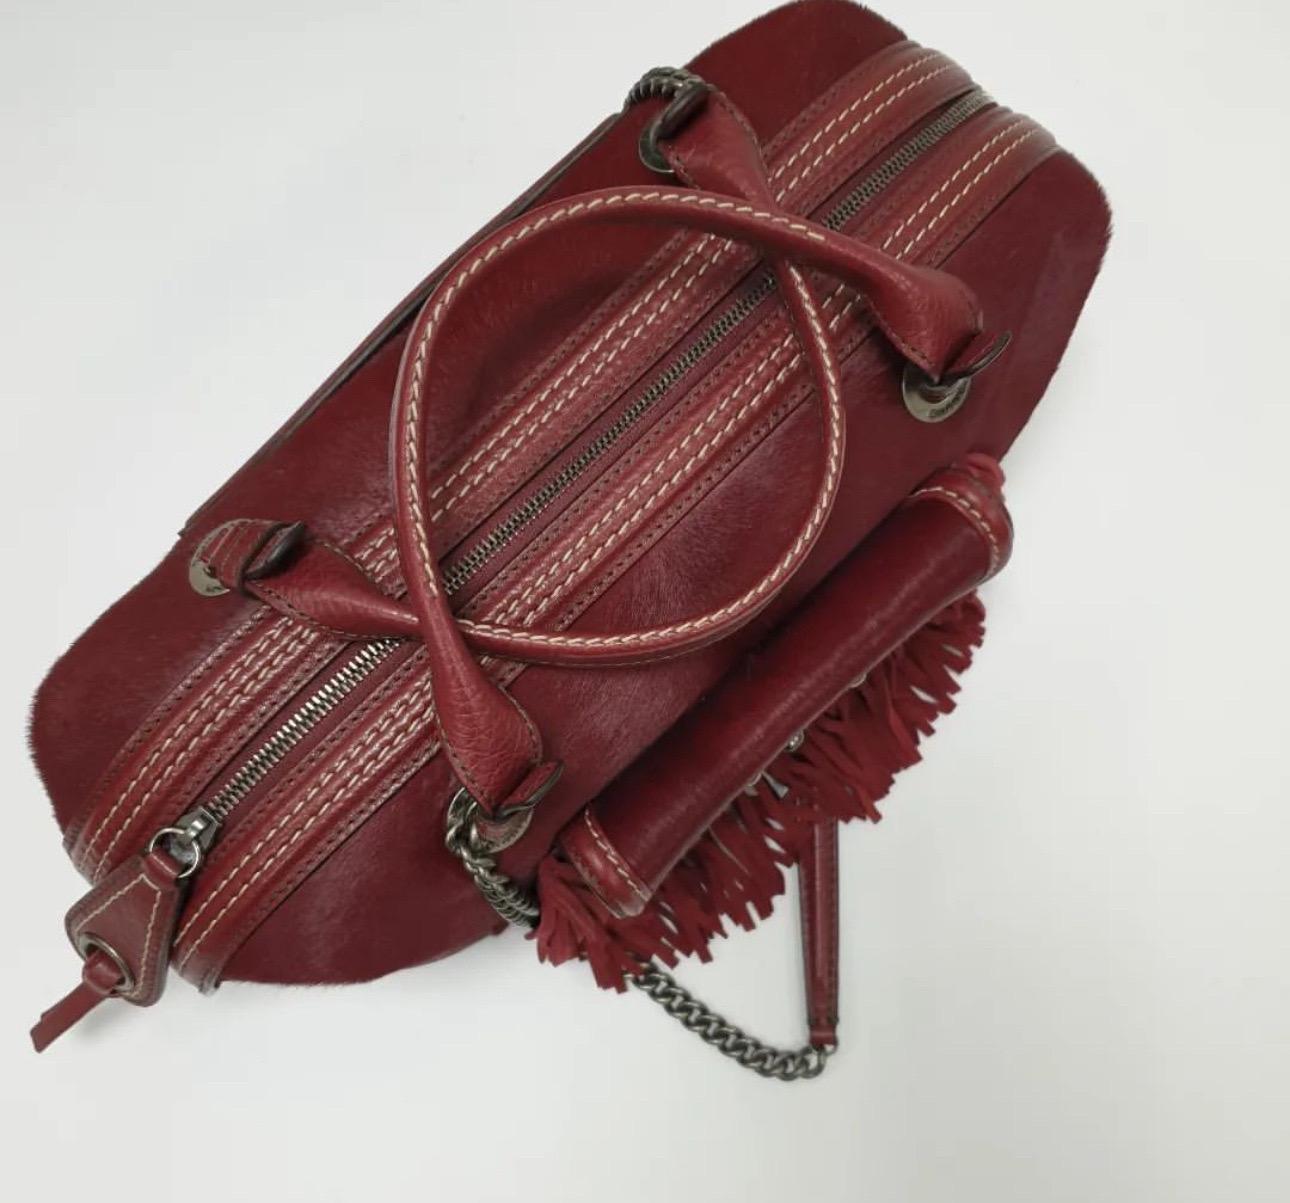 Chanel women's burgundy Pony hair and leather fringe Paris-Dallas bowling bag. Inspired by America and cowboys this fabulous bag from Chanel's 2014 Pre-Fall Meitiers D'Art, Paris-Dallas collection features incredible details such as pony hair with